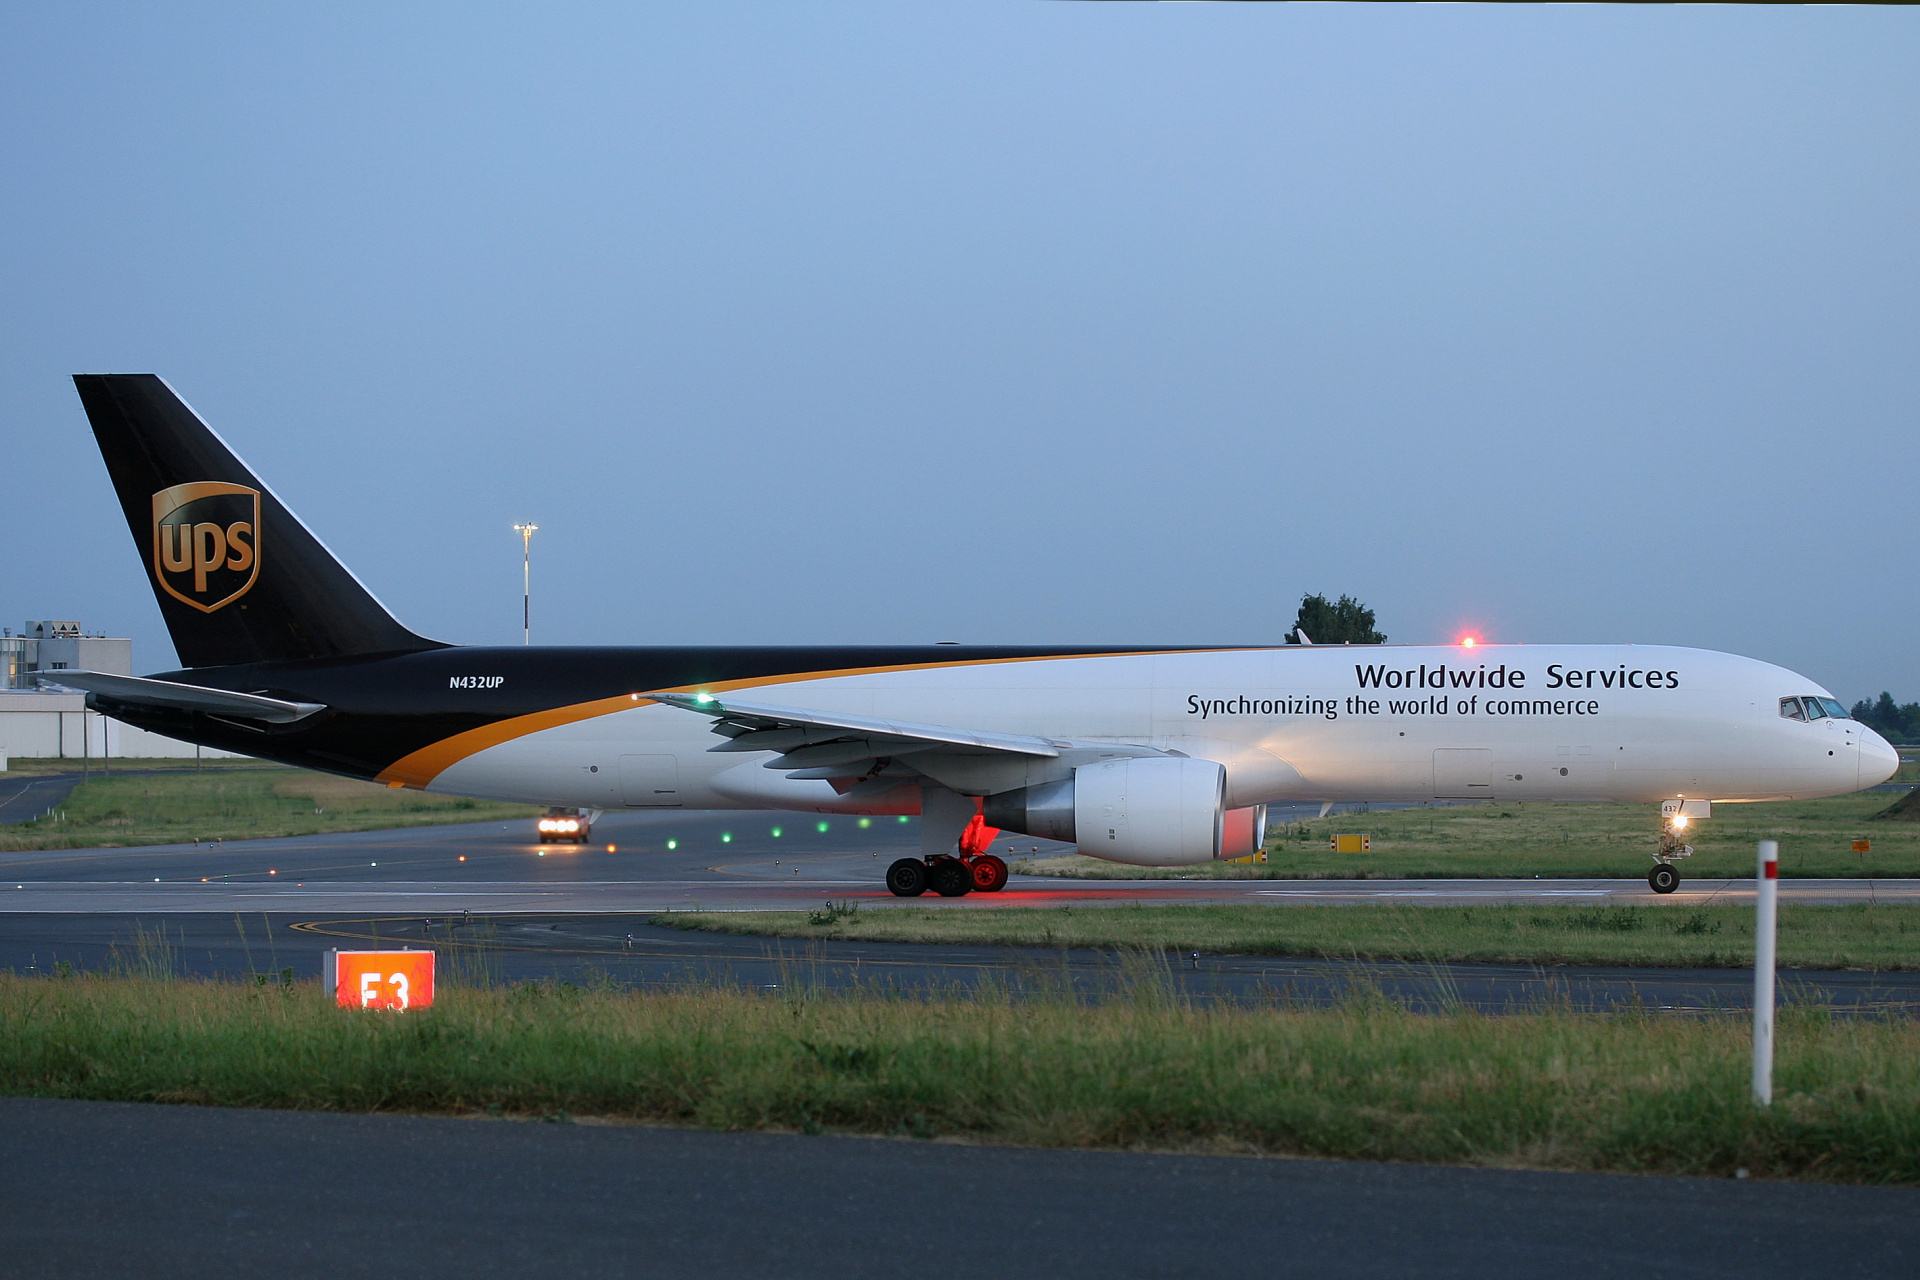 PF, N432UP (Aircraft » EPWA Spotting » Boeing 757-200F » United Parcel Service (UPS) Airlines)